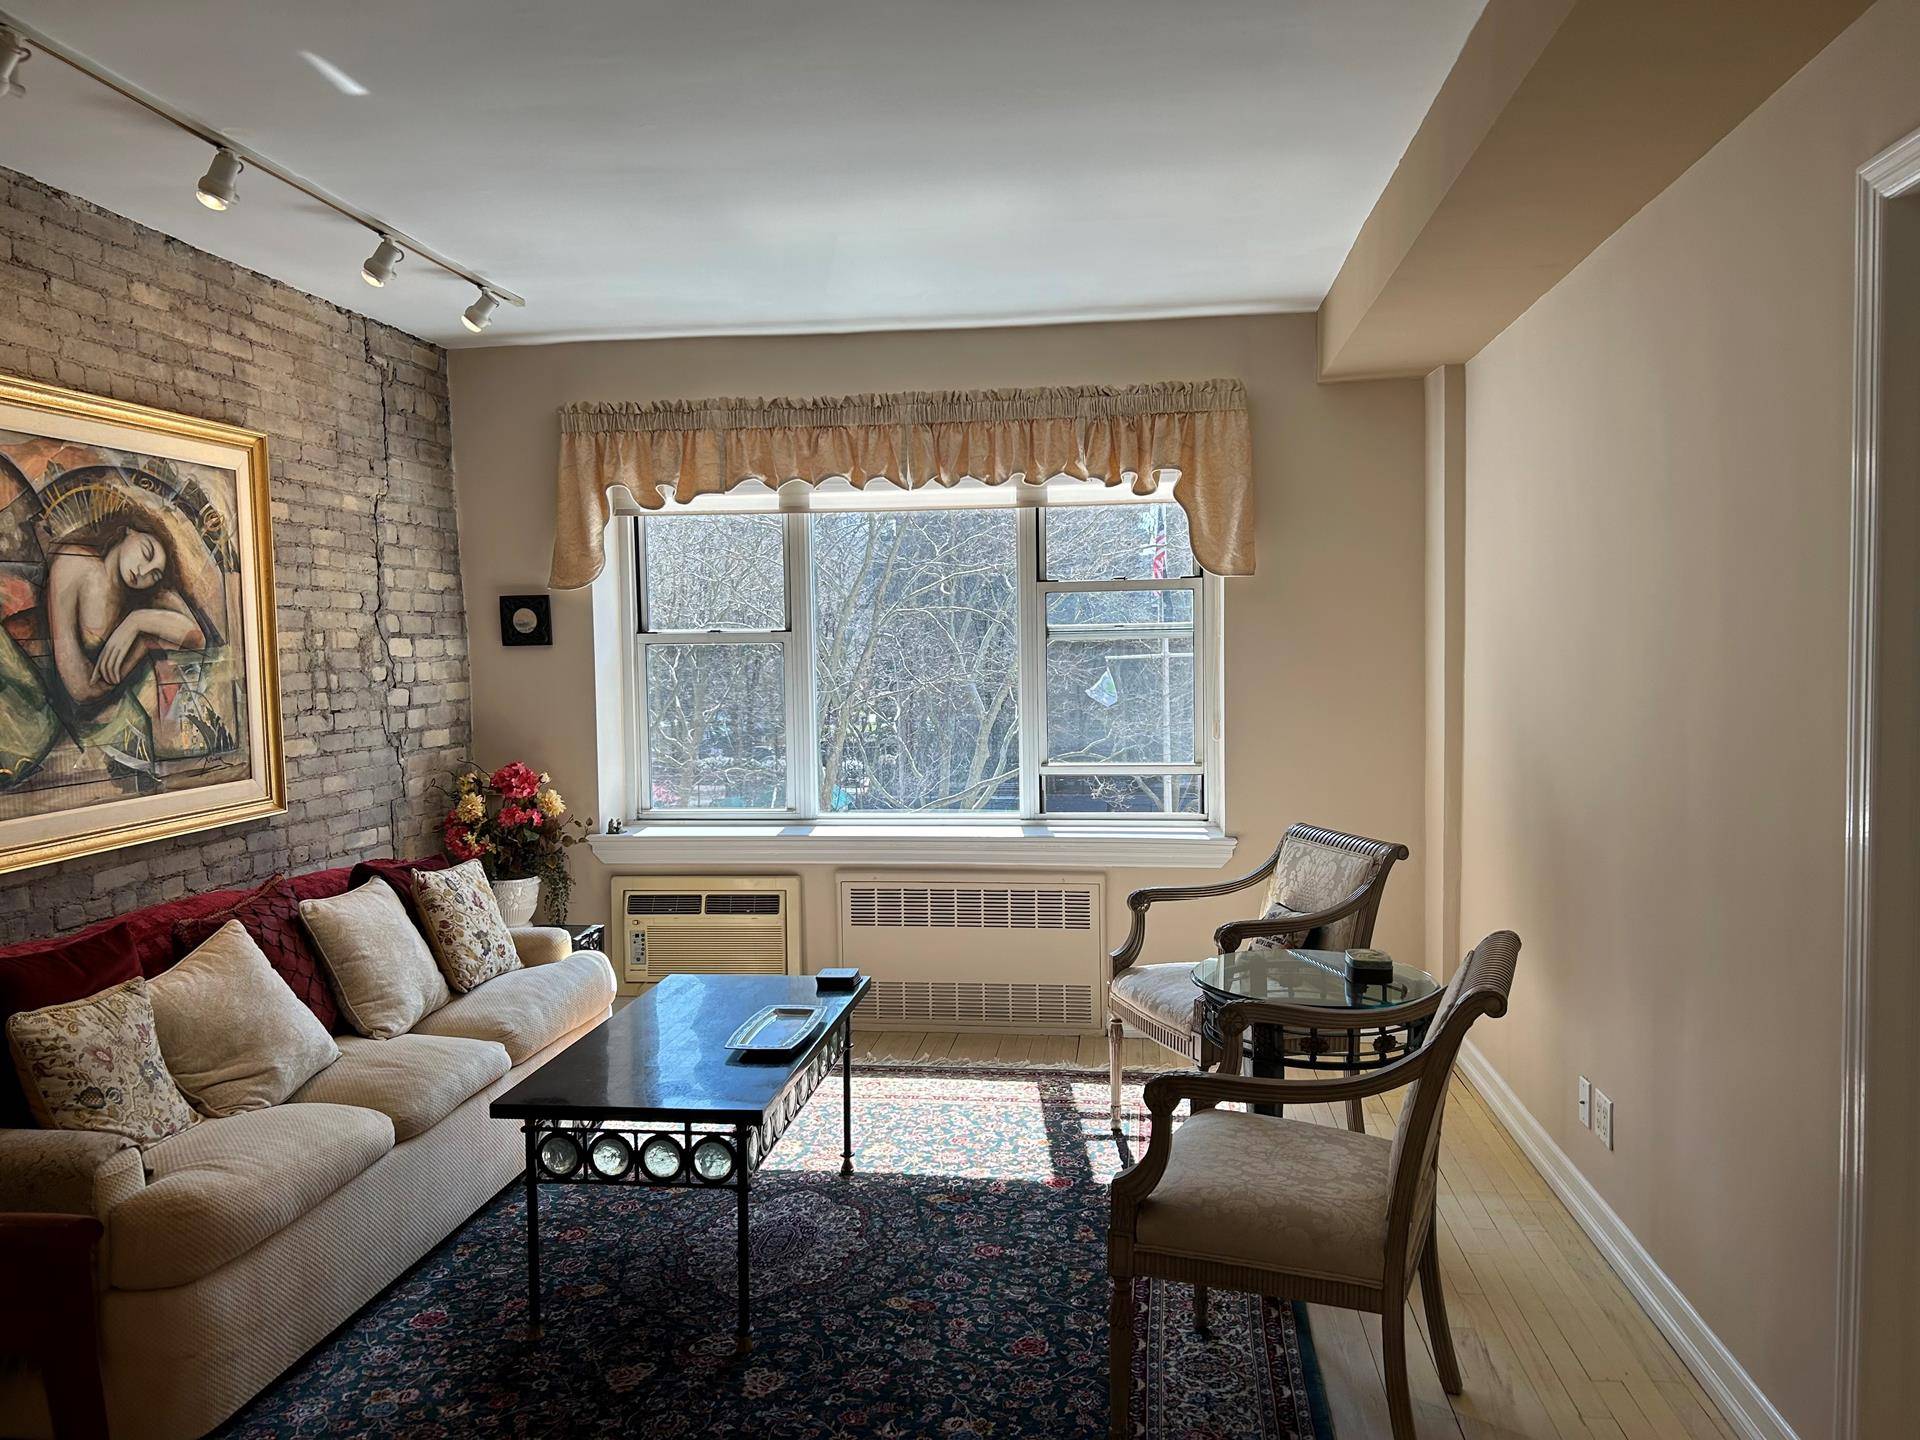 Welcome to your sanctuary in the heart of the Upper West Side, where Unit 3E awaits to welcome you home.